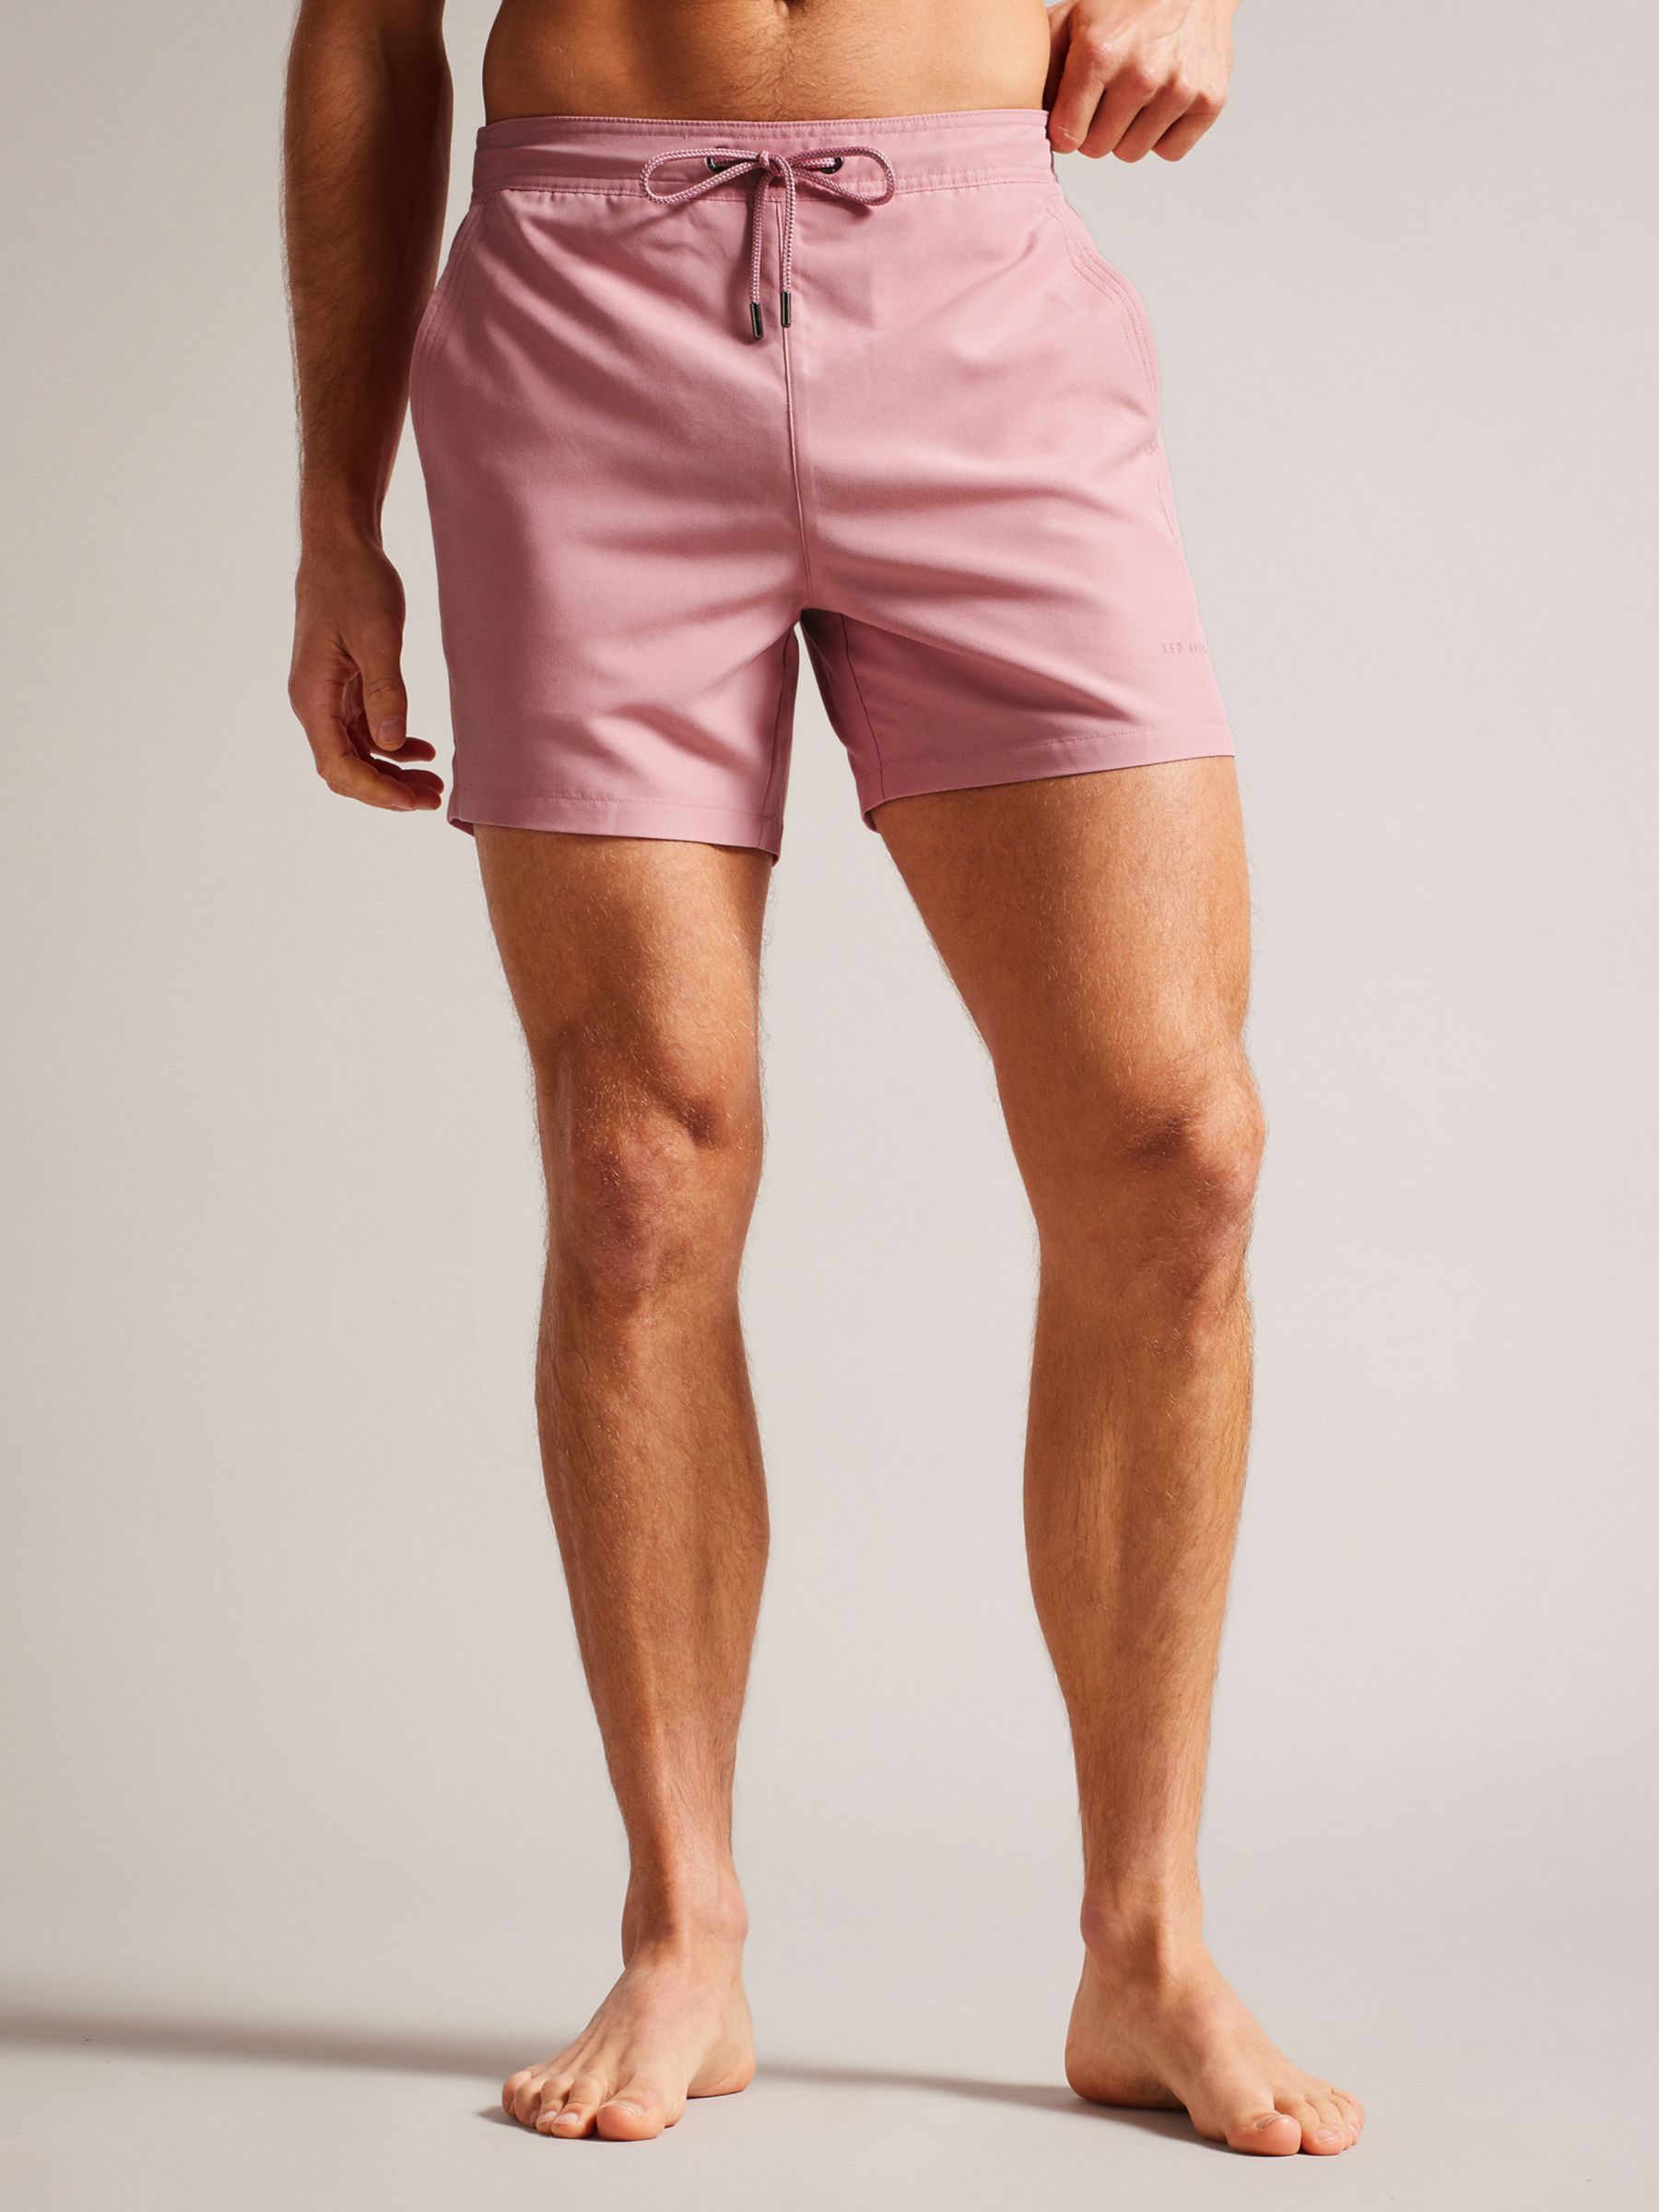 Ted Baker Hiltree Swimming Trunks, Pink, XS